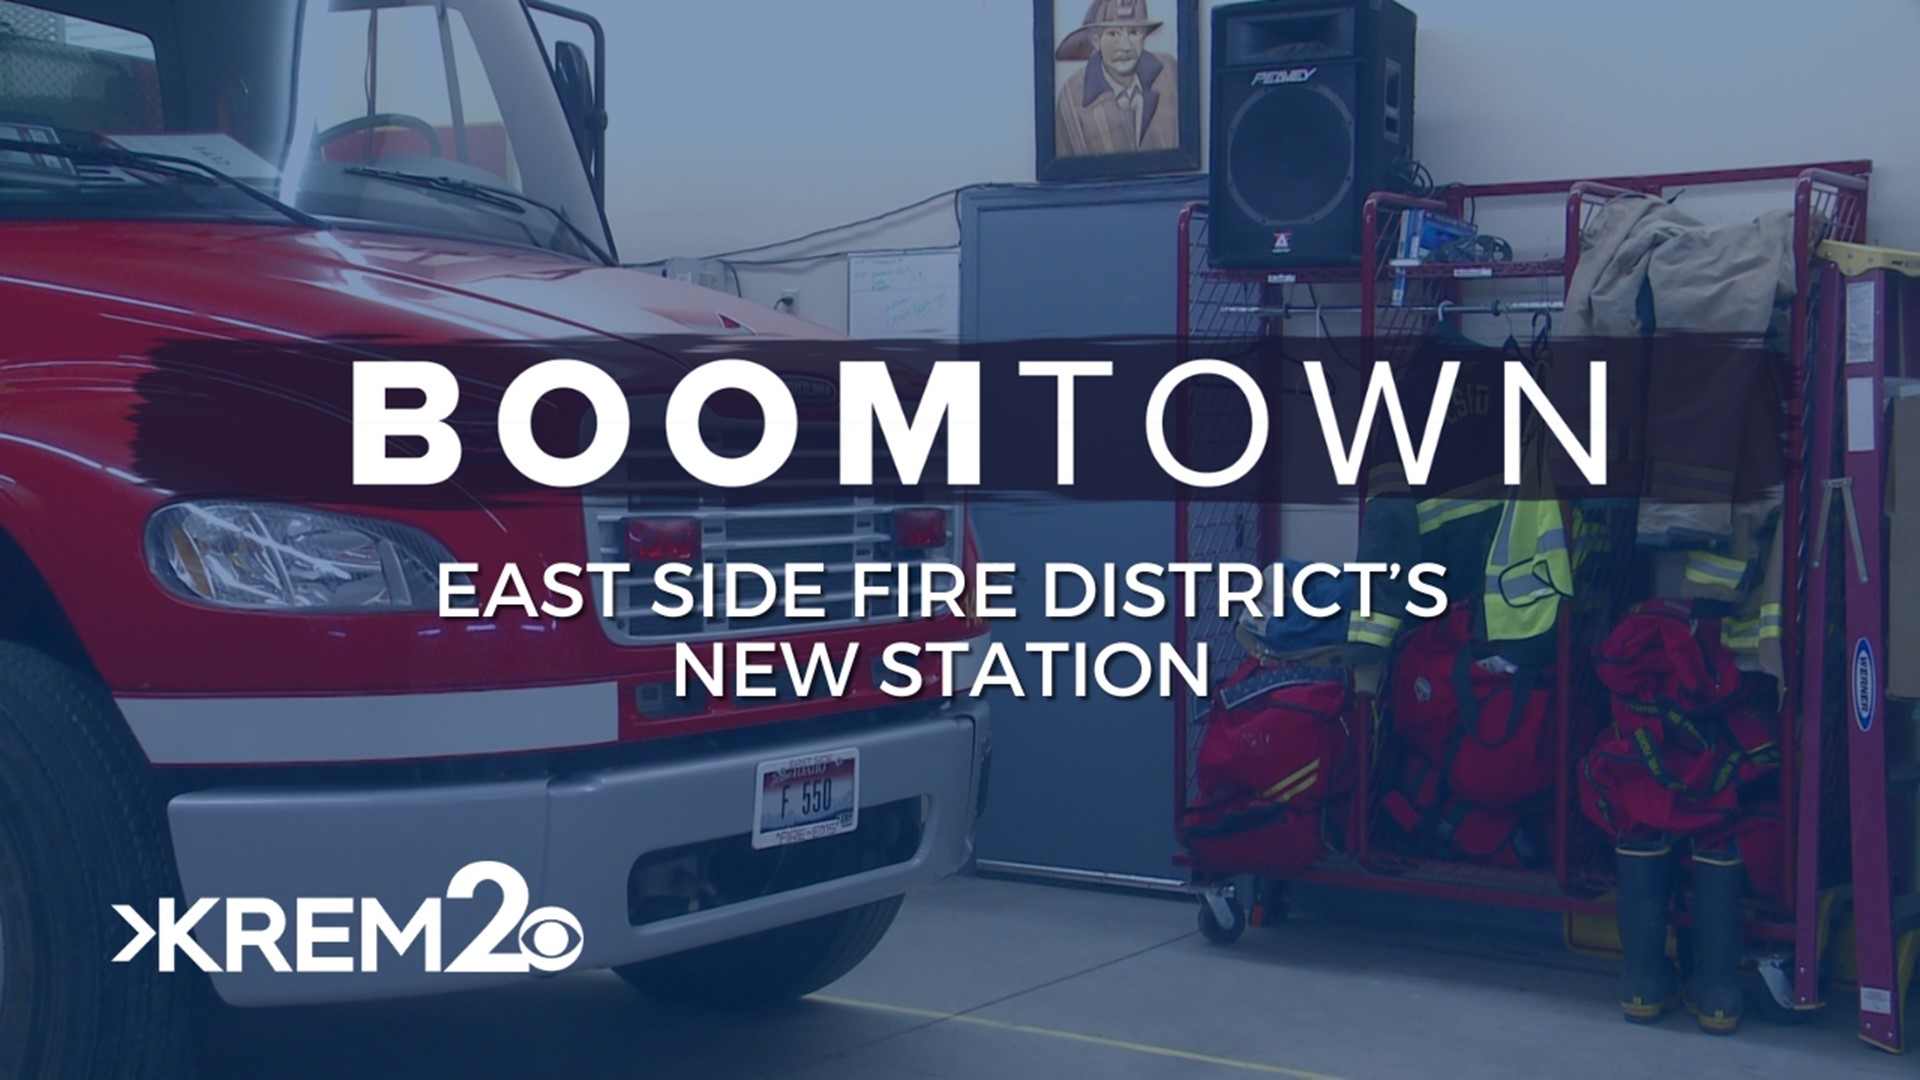 East Side Fire District's call volume has doubled in the last decade. That's why the fire district brought in its first ambulance and is building a new fire station.